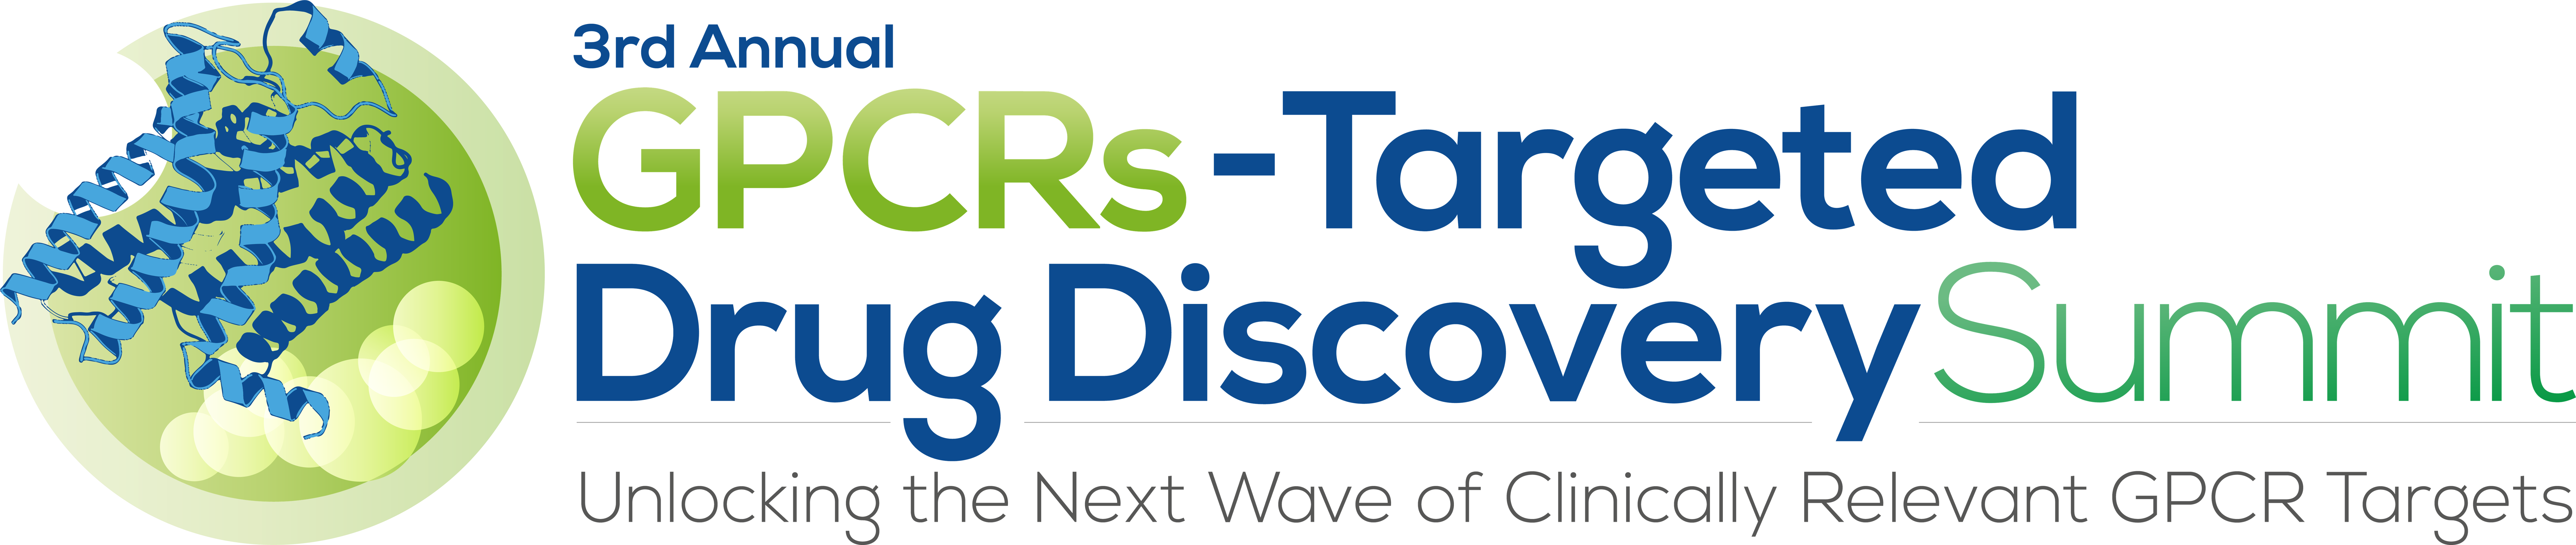 HW230926 3rd GPCRs Targeted Drug Discovery Summit logo